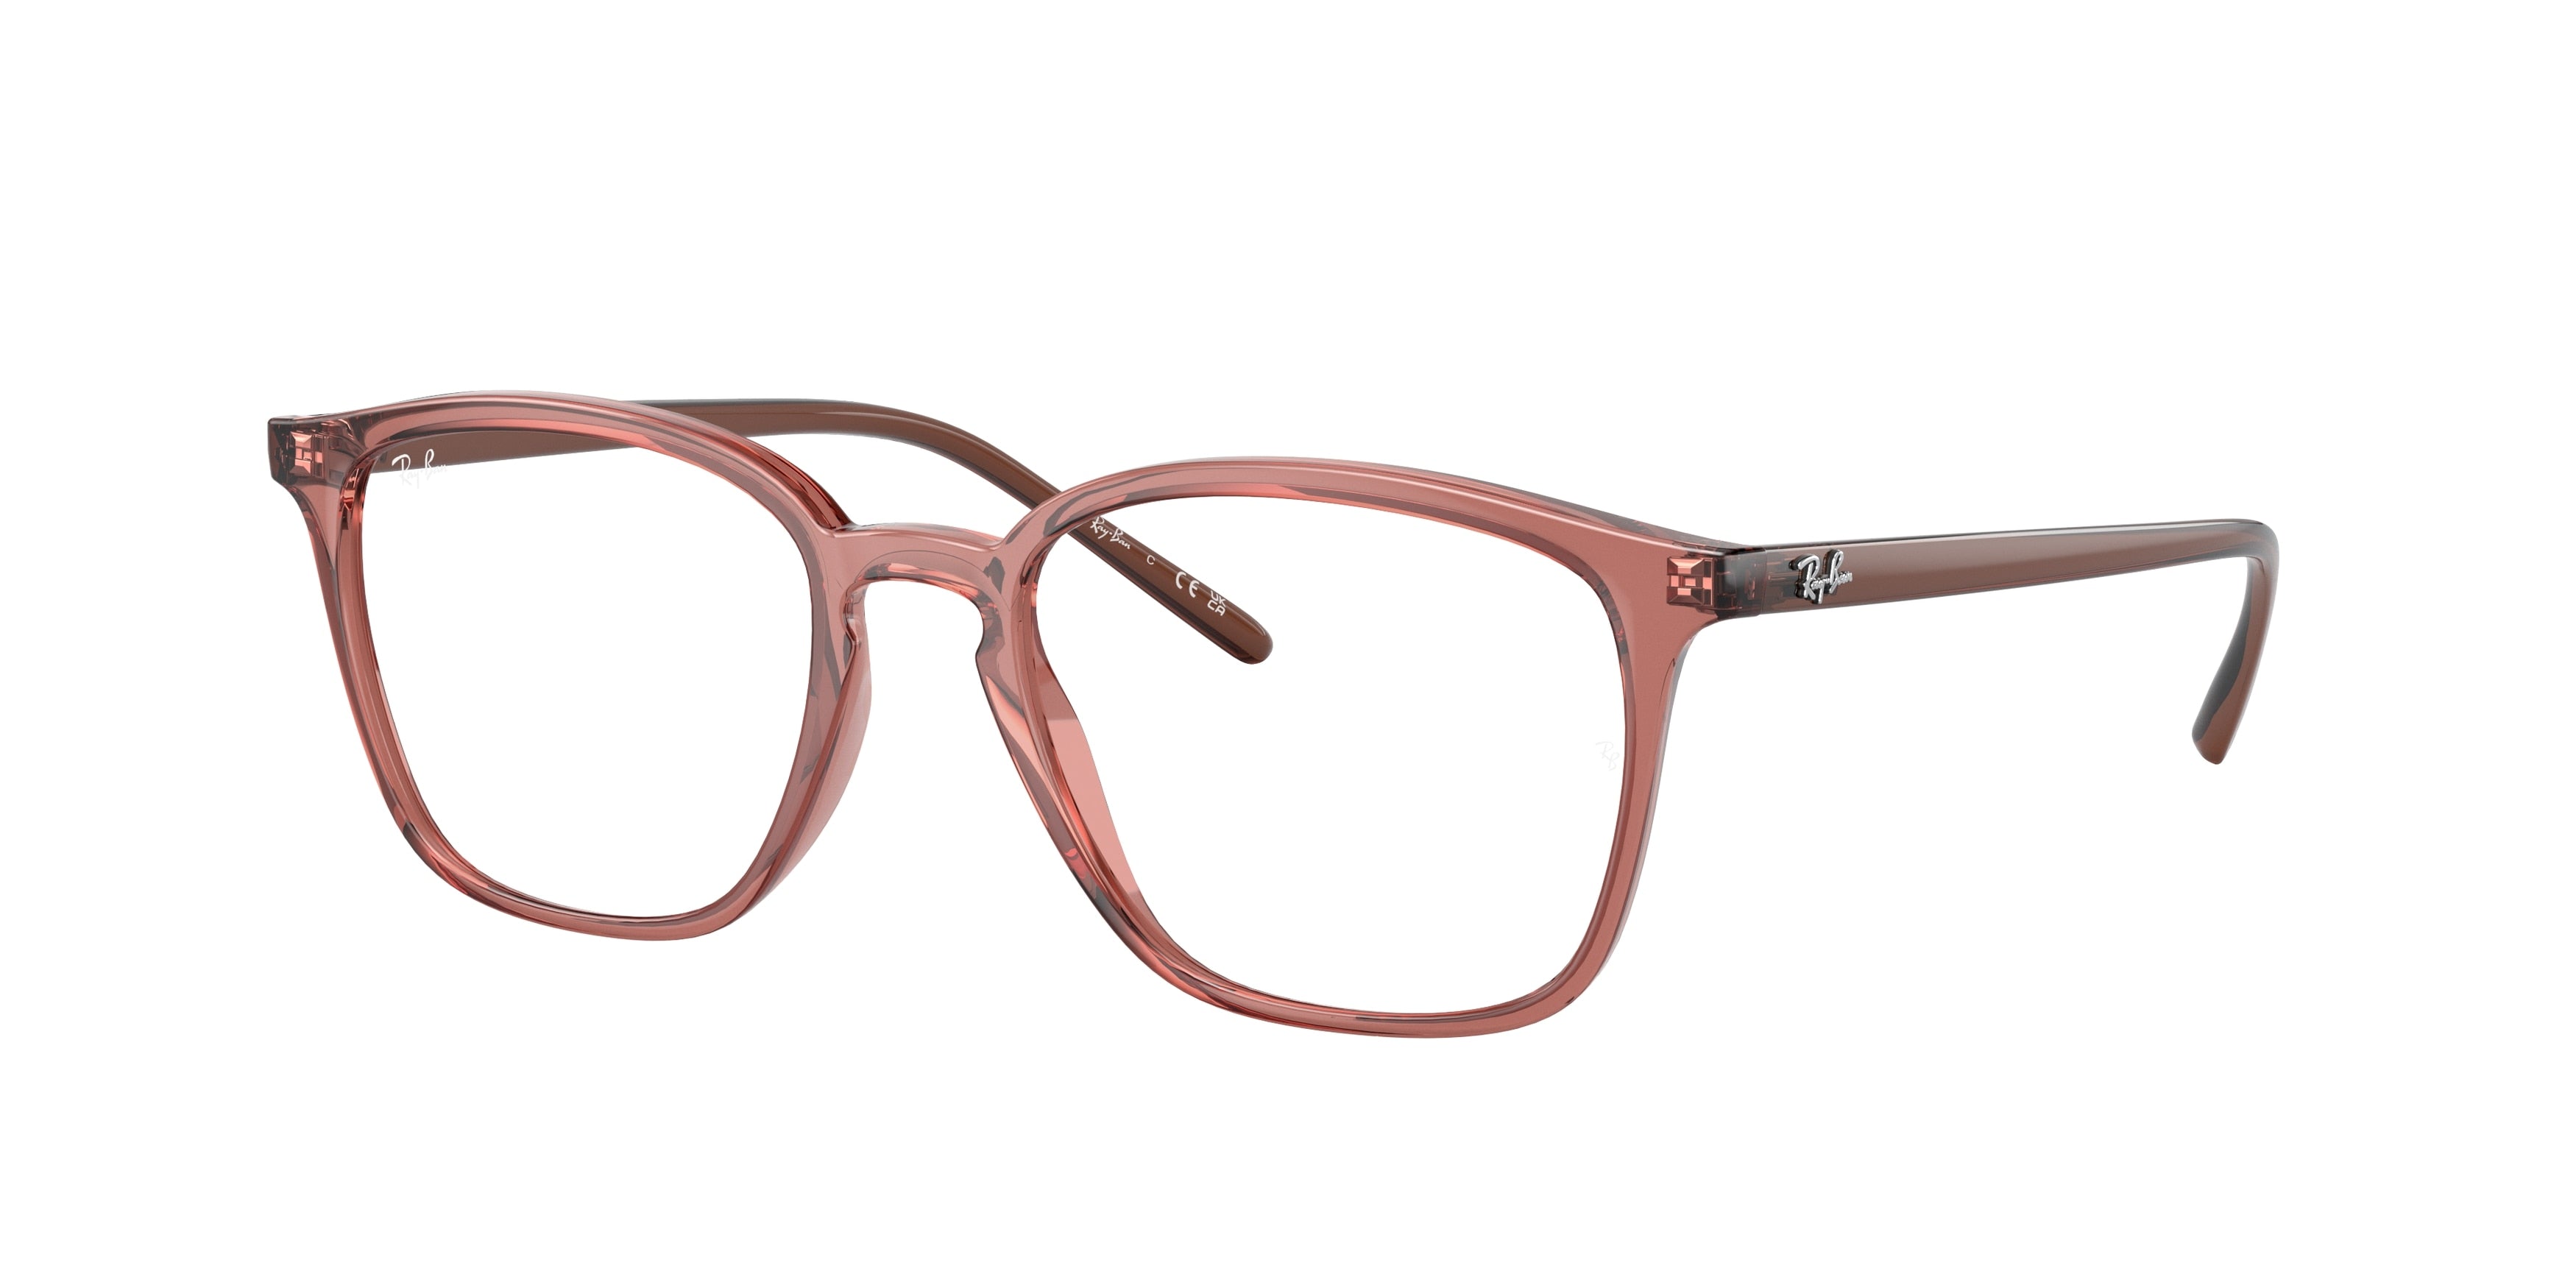 Ray-Ban Optical RX7185 Square Eyeglasses  8234-Transparent Light Brown 52-145-18 - Color Map Beige